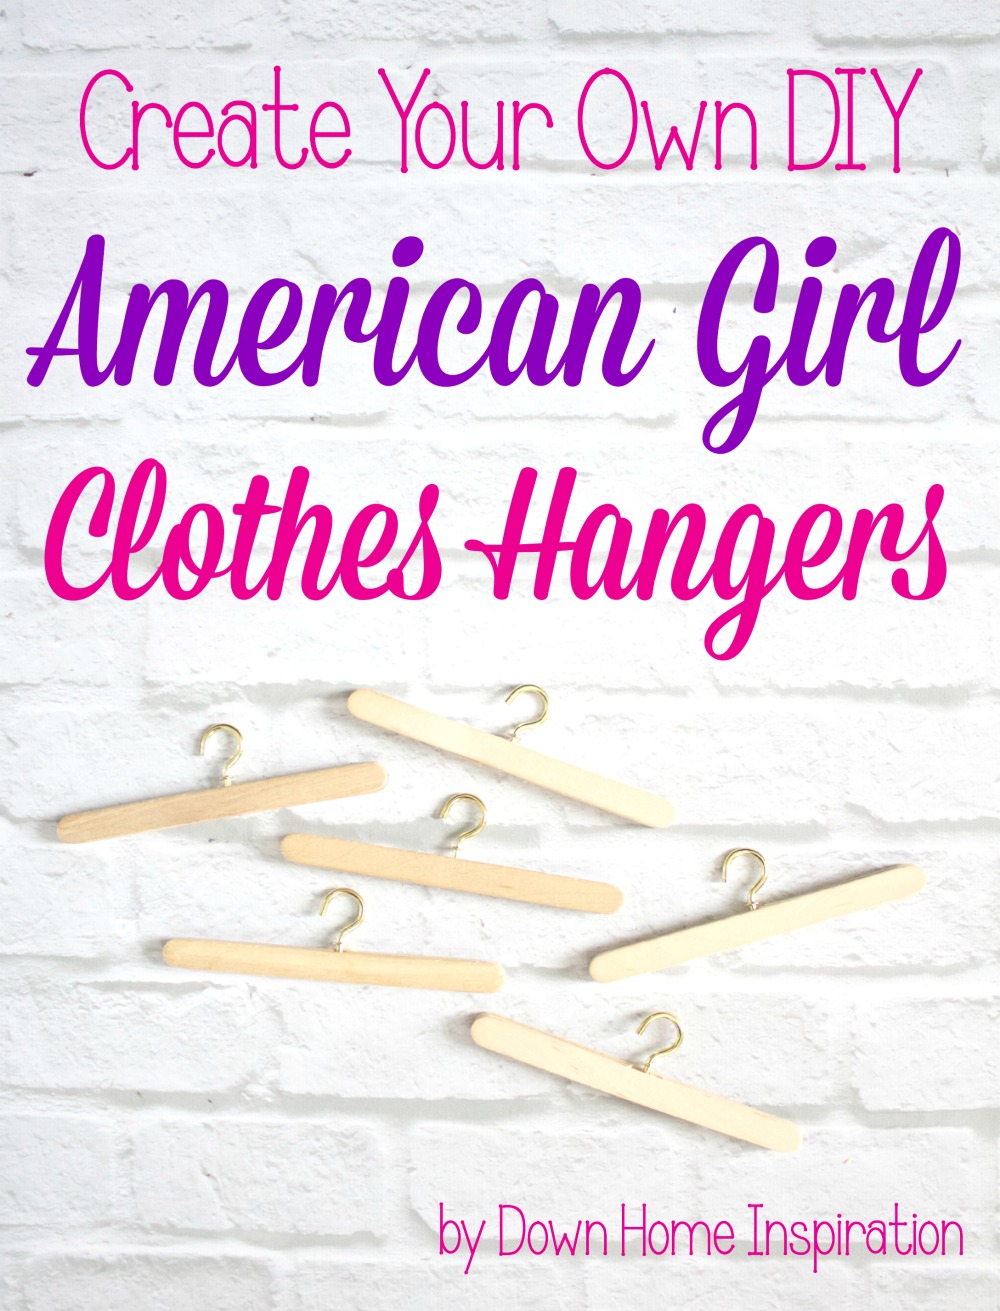 Create Your Own DIY American Girl Clothes Hangers - Down Home